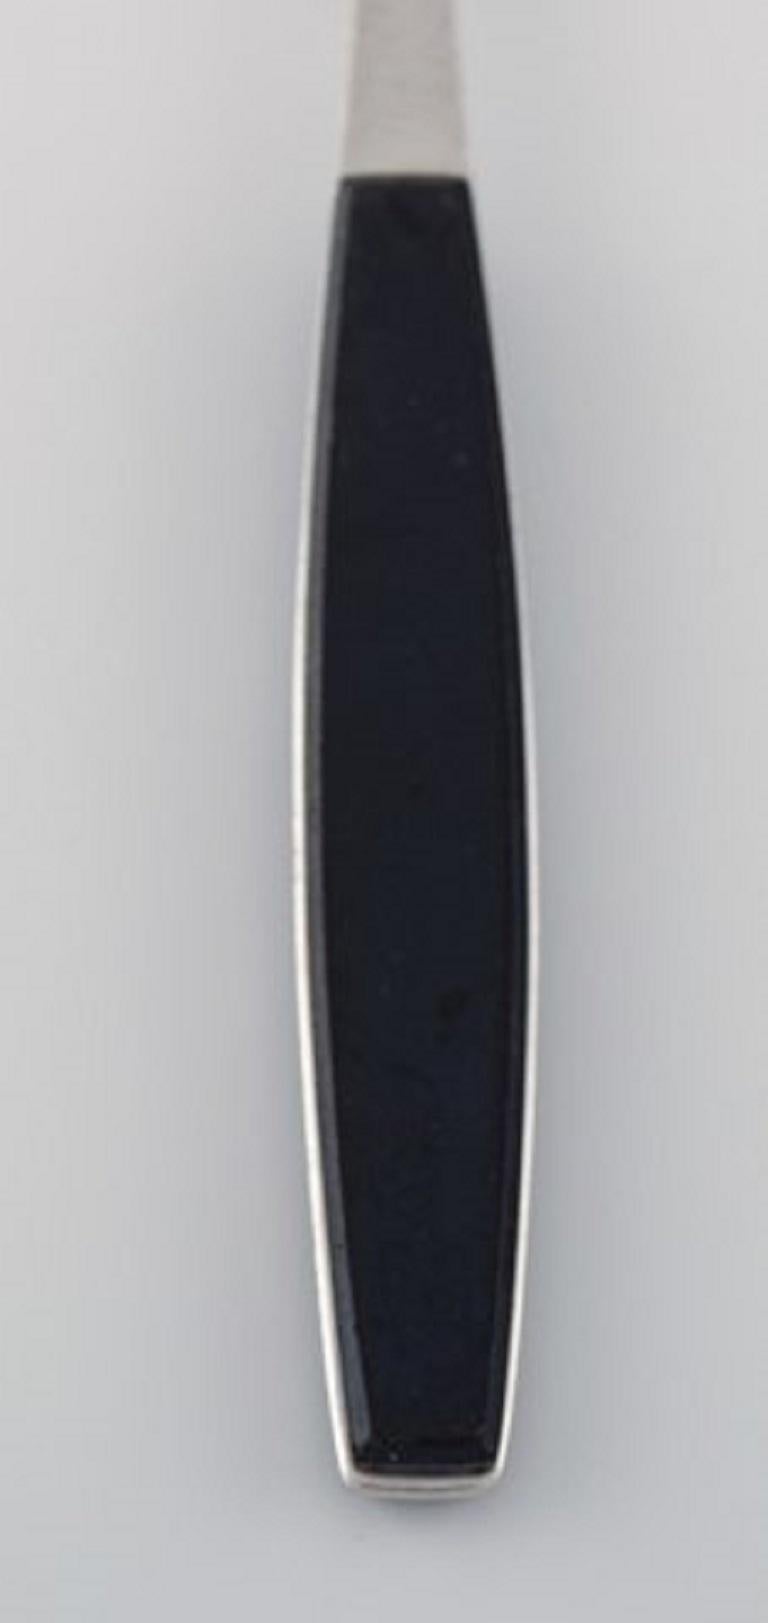 Henning Koppel for Georg Jensen. Strata sorbet spoon in stainless steel and black plastic. 1960s-1970s. 25 pieces in stock.
Measures: Length 16.5 cm.
In very good condition.
Stamped.